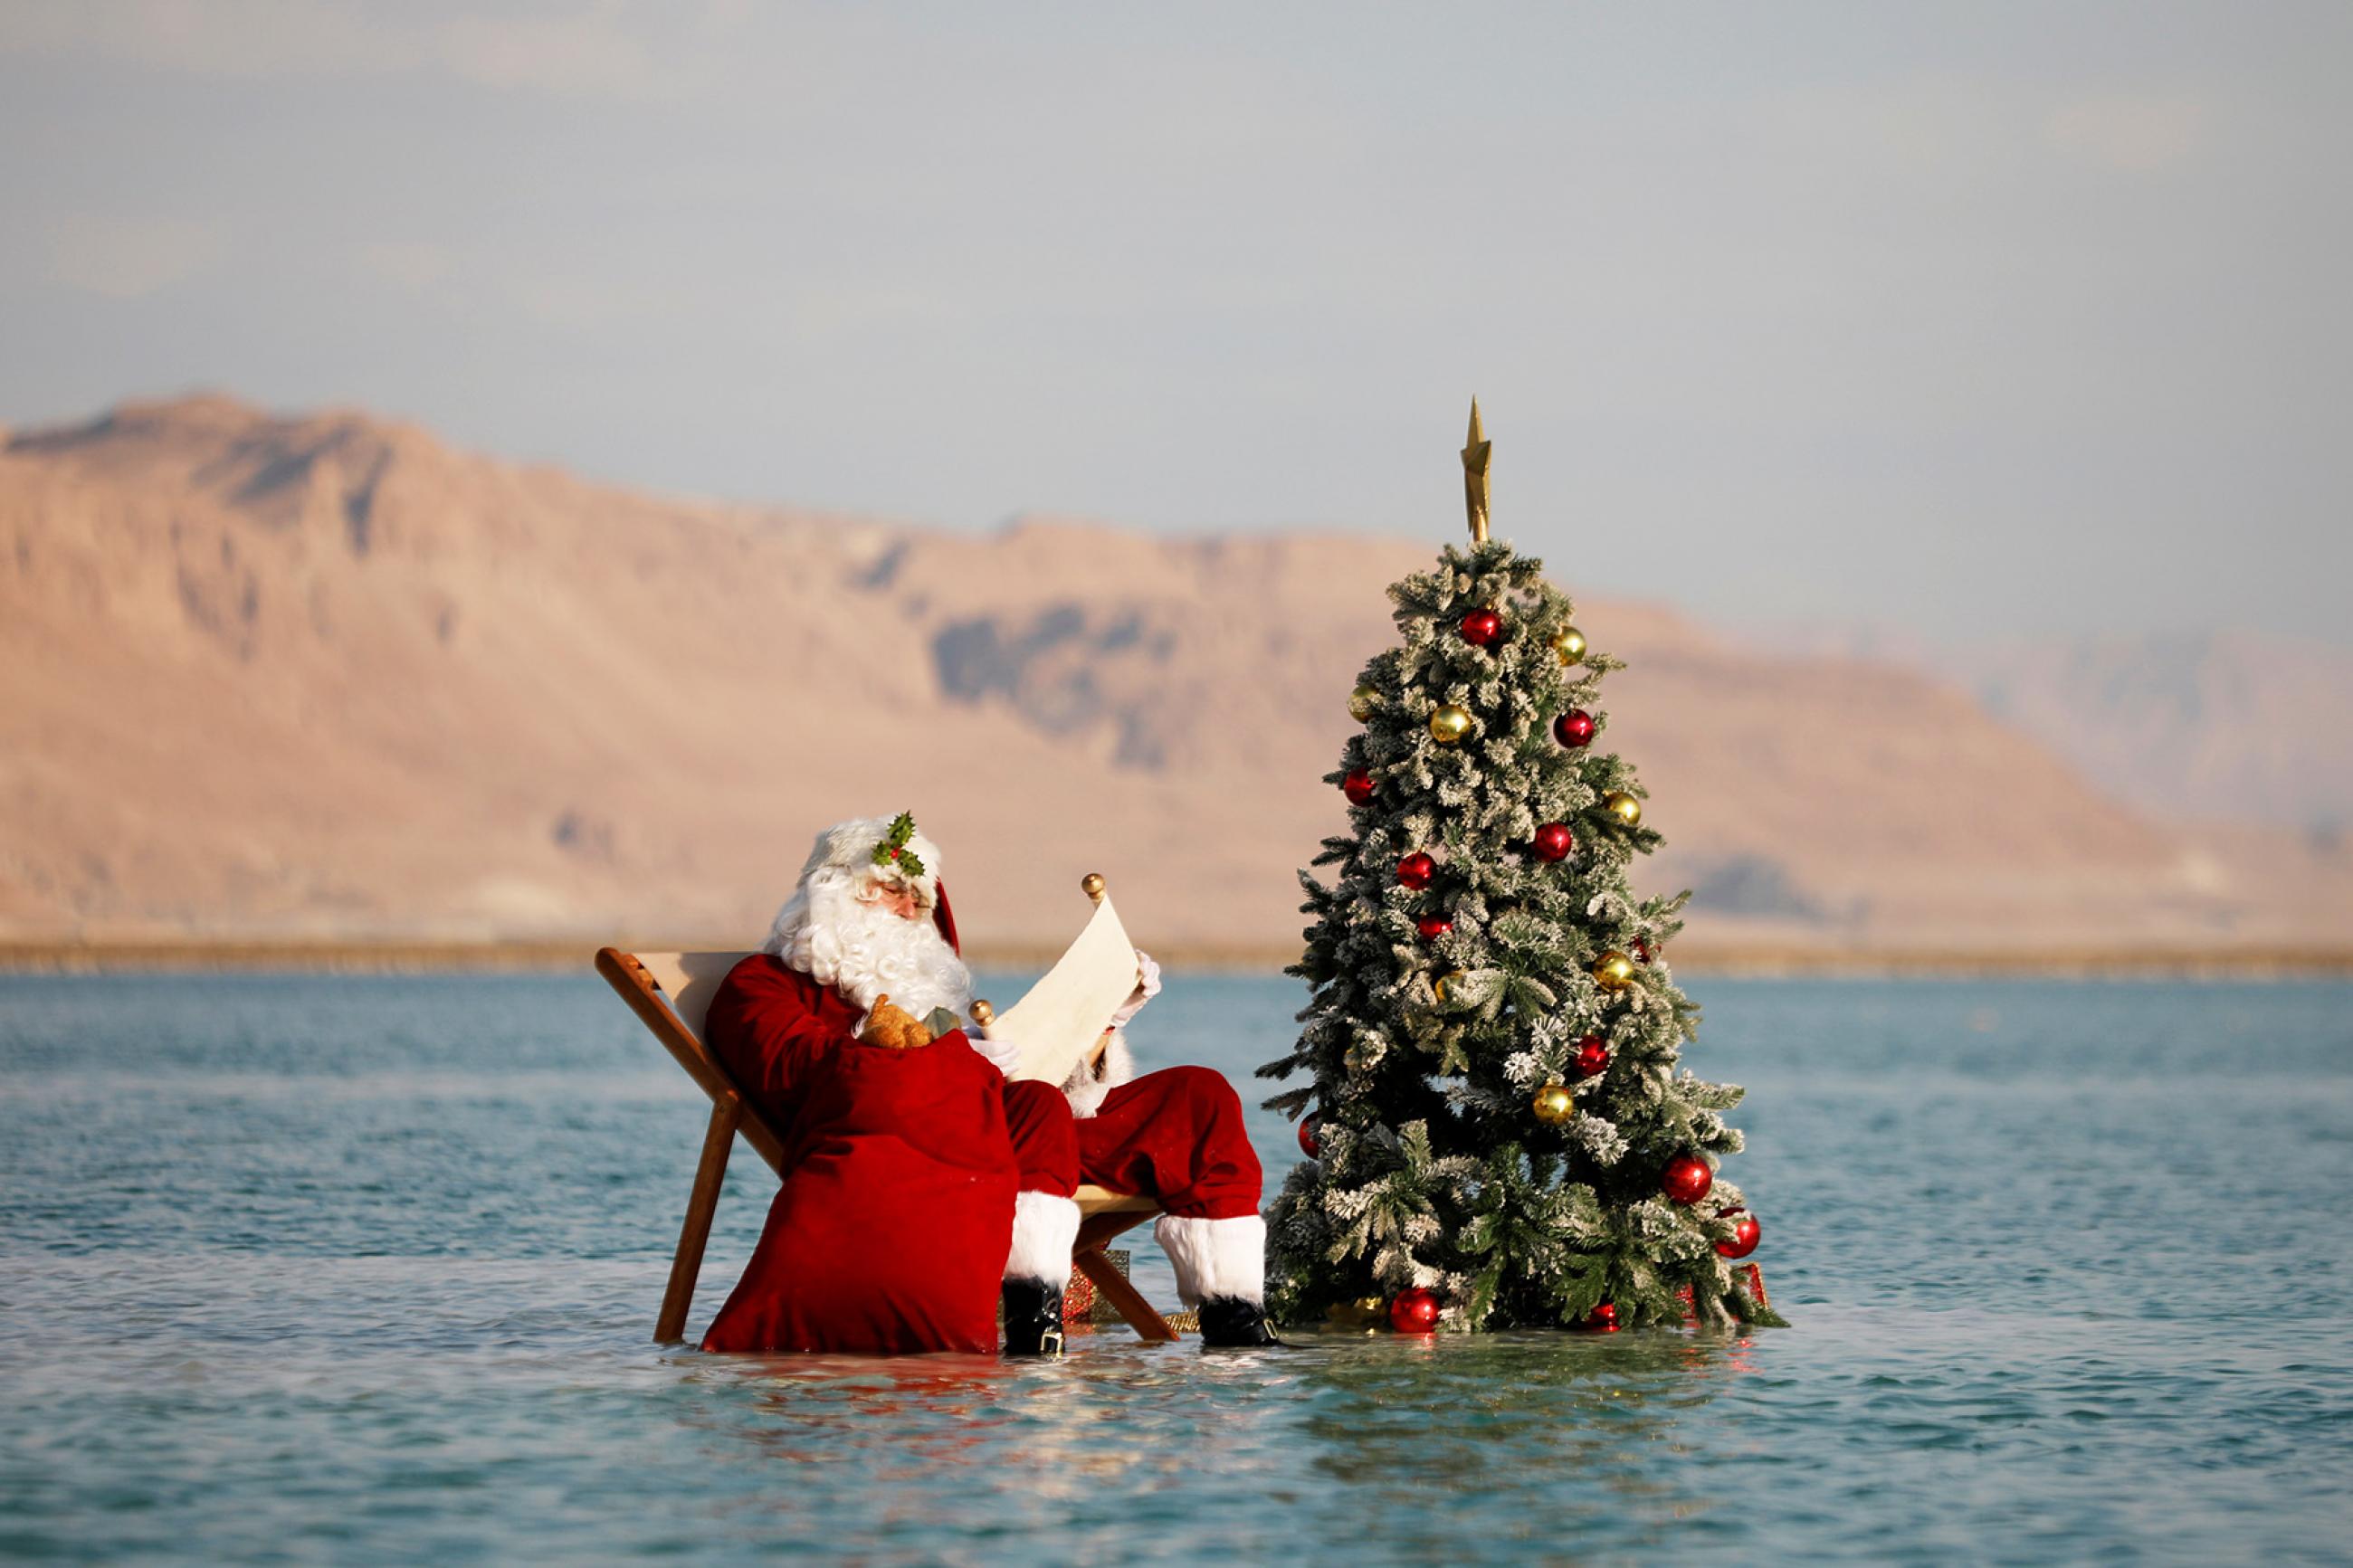 A man, wearing a red Santa Claus costume complete with a hat, beard, and bag full of toys, holds a scroll as he poses for a picture while sitting next to a decorated Christmas tree on a salt formation in the Dead Sea, near Ein Bokeq, Israel on November 15, 2020.